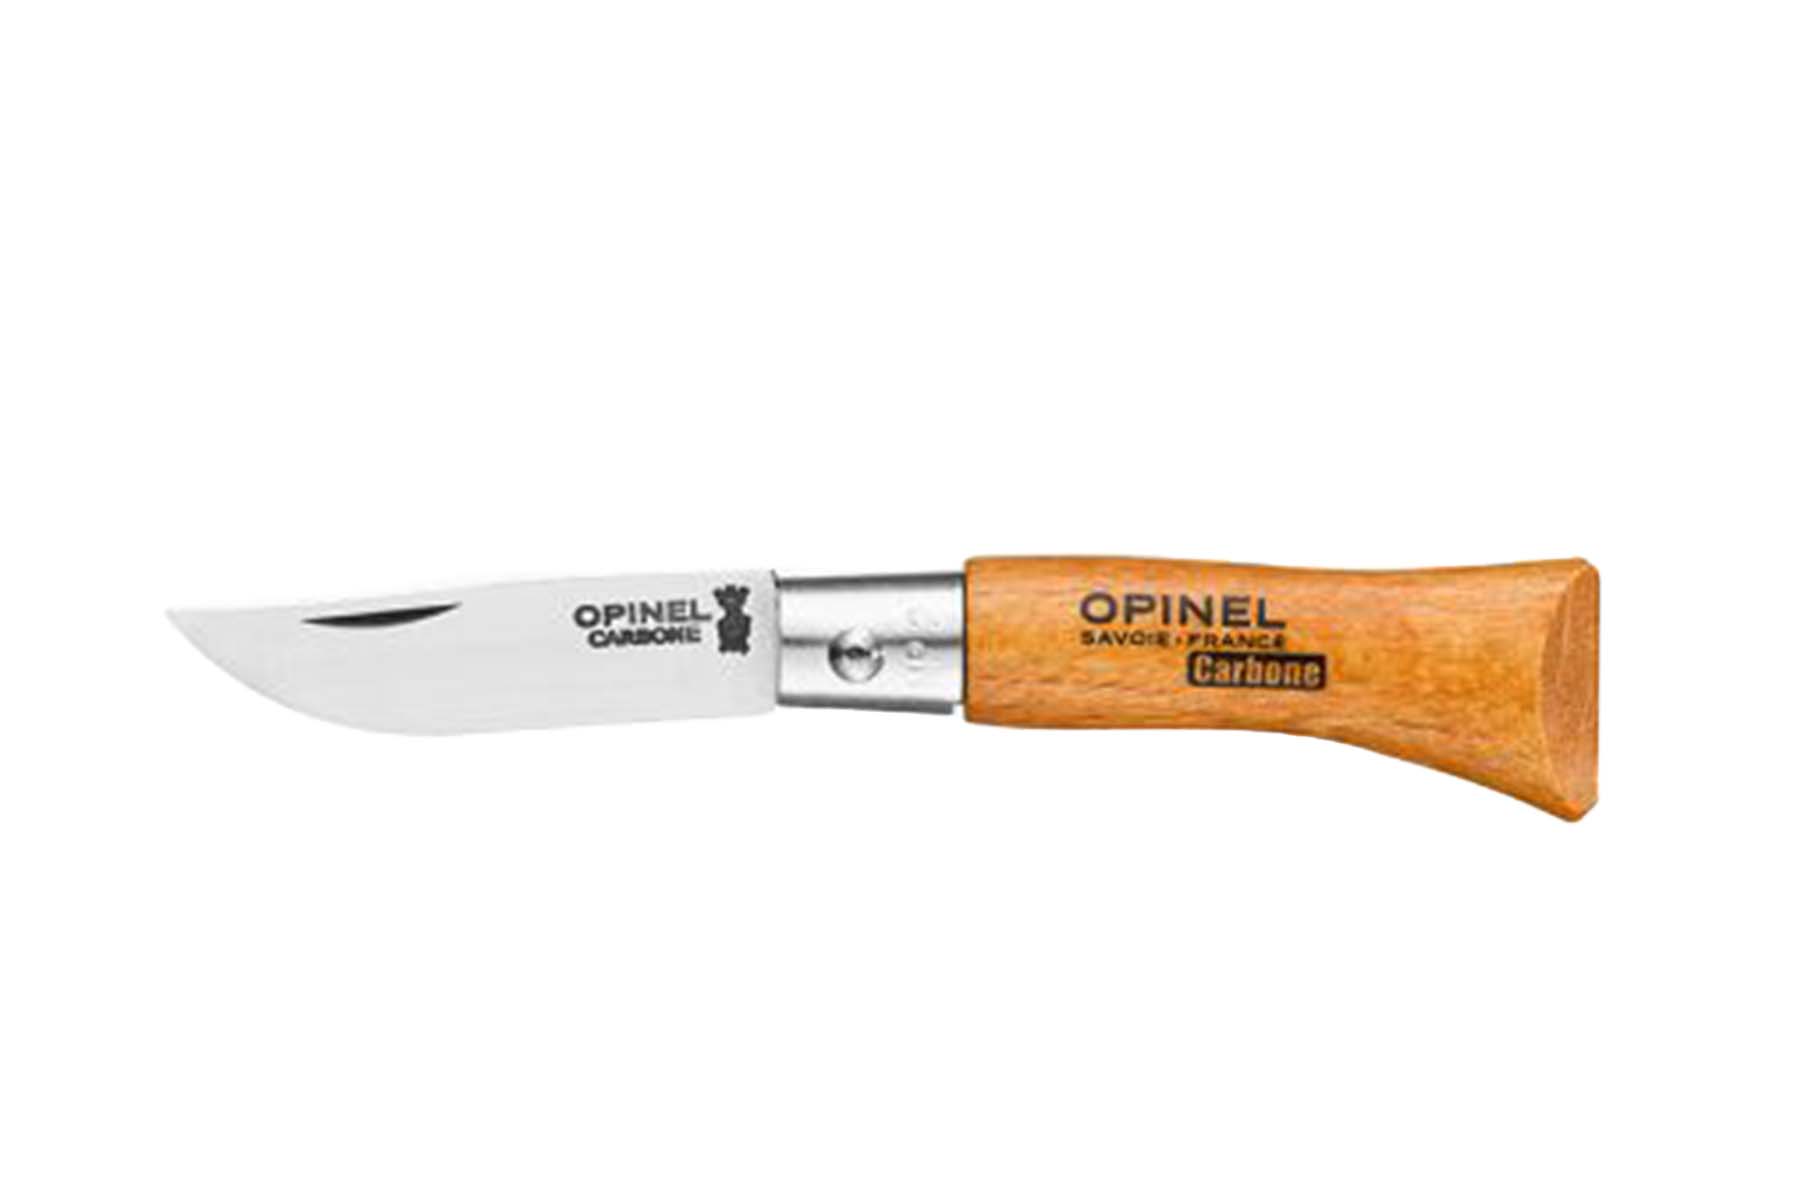 Couteau Opinel n°02 lame carbone